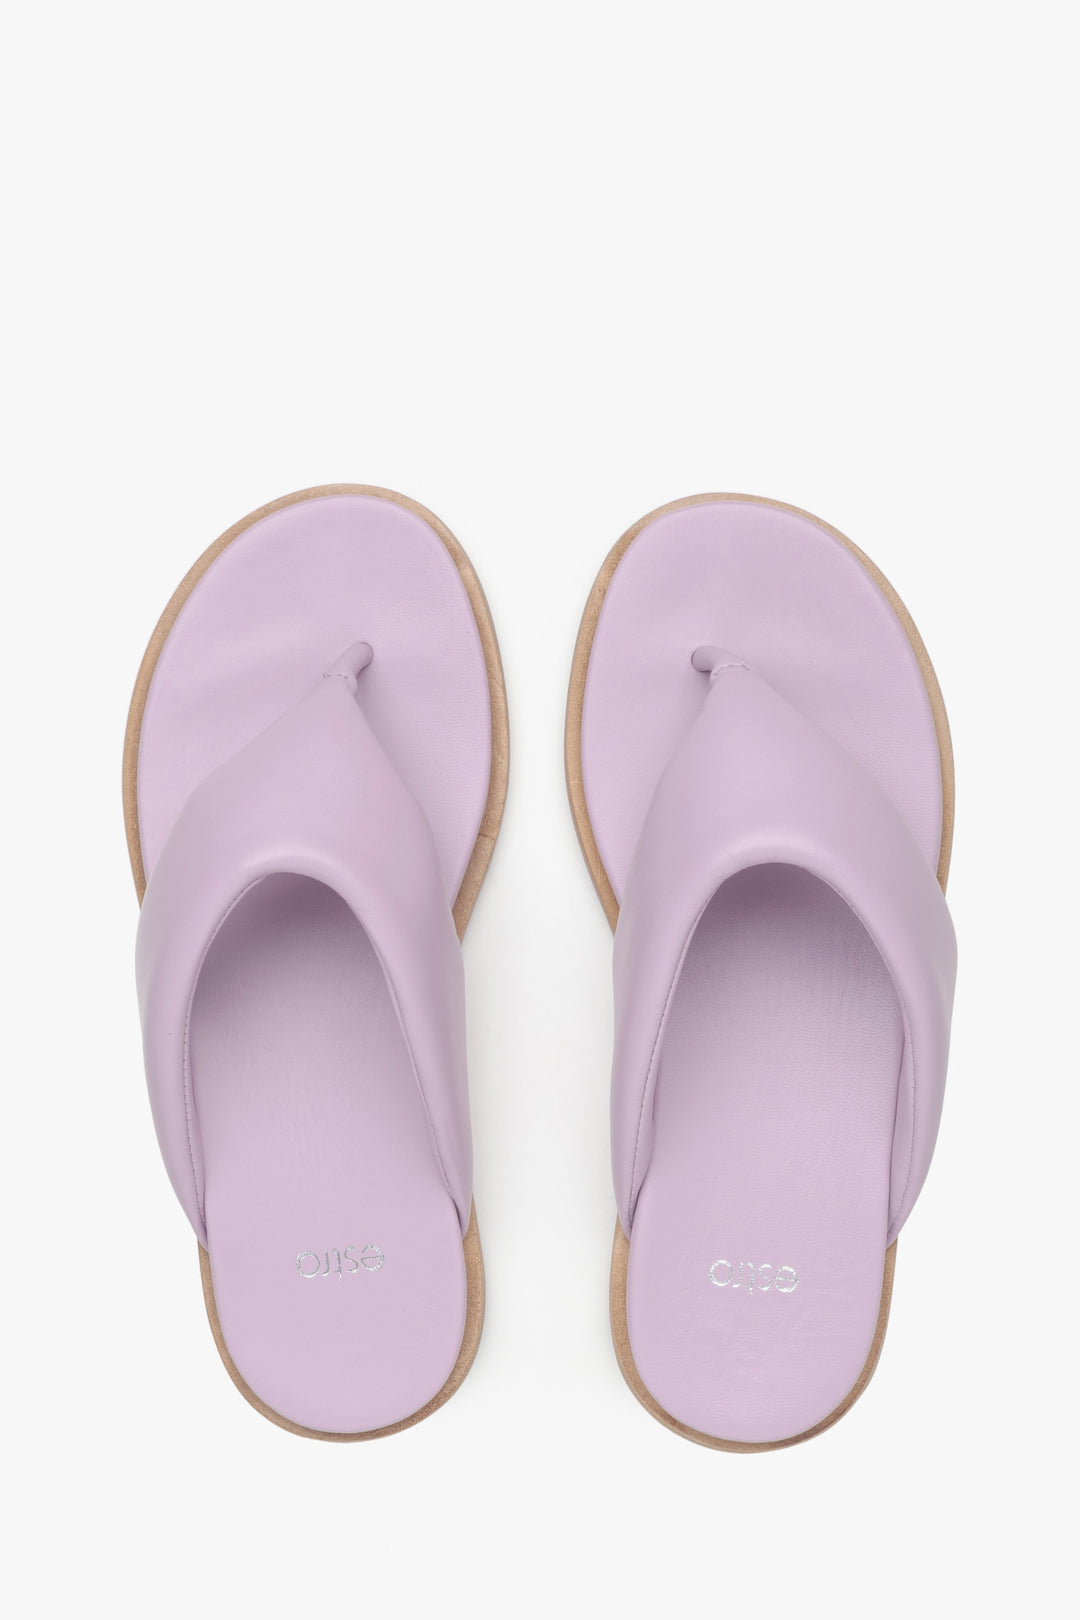 Women's lilac leather thong slide sandals Estro - presentation from above.